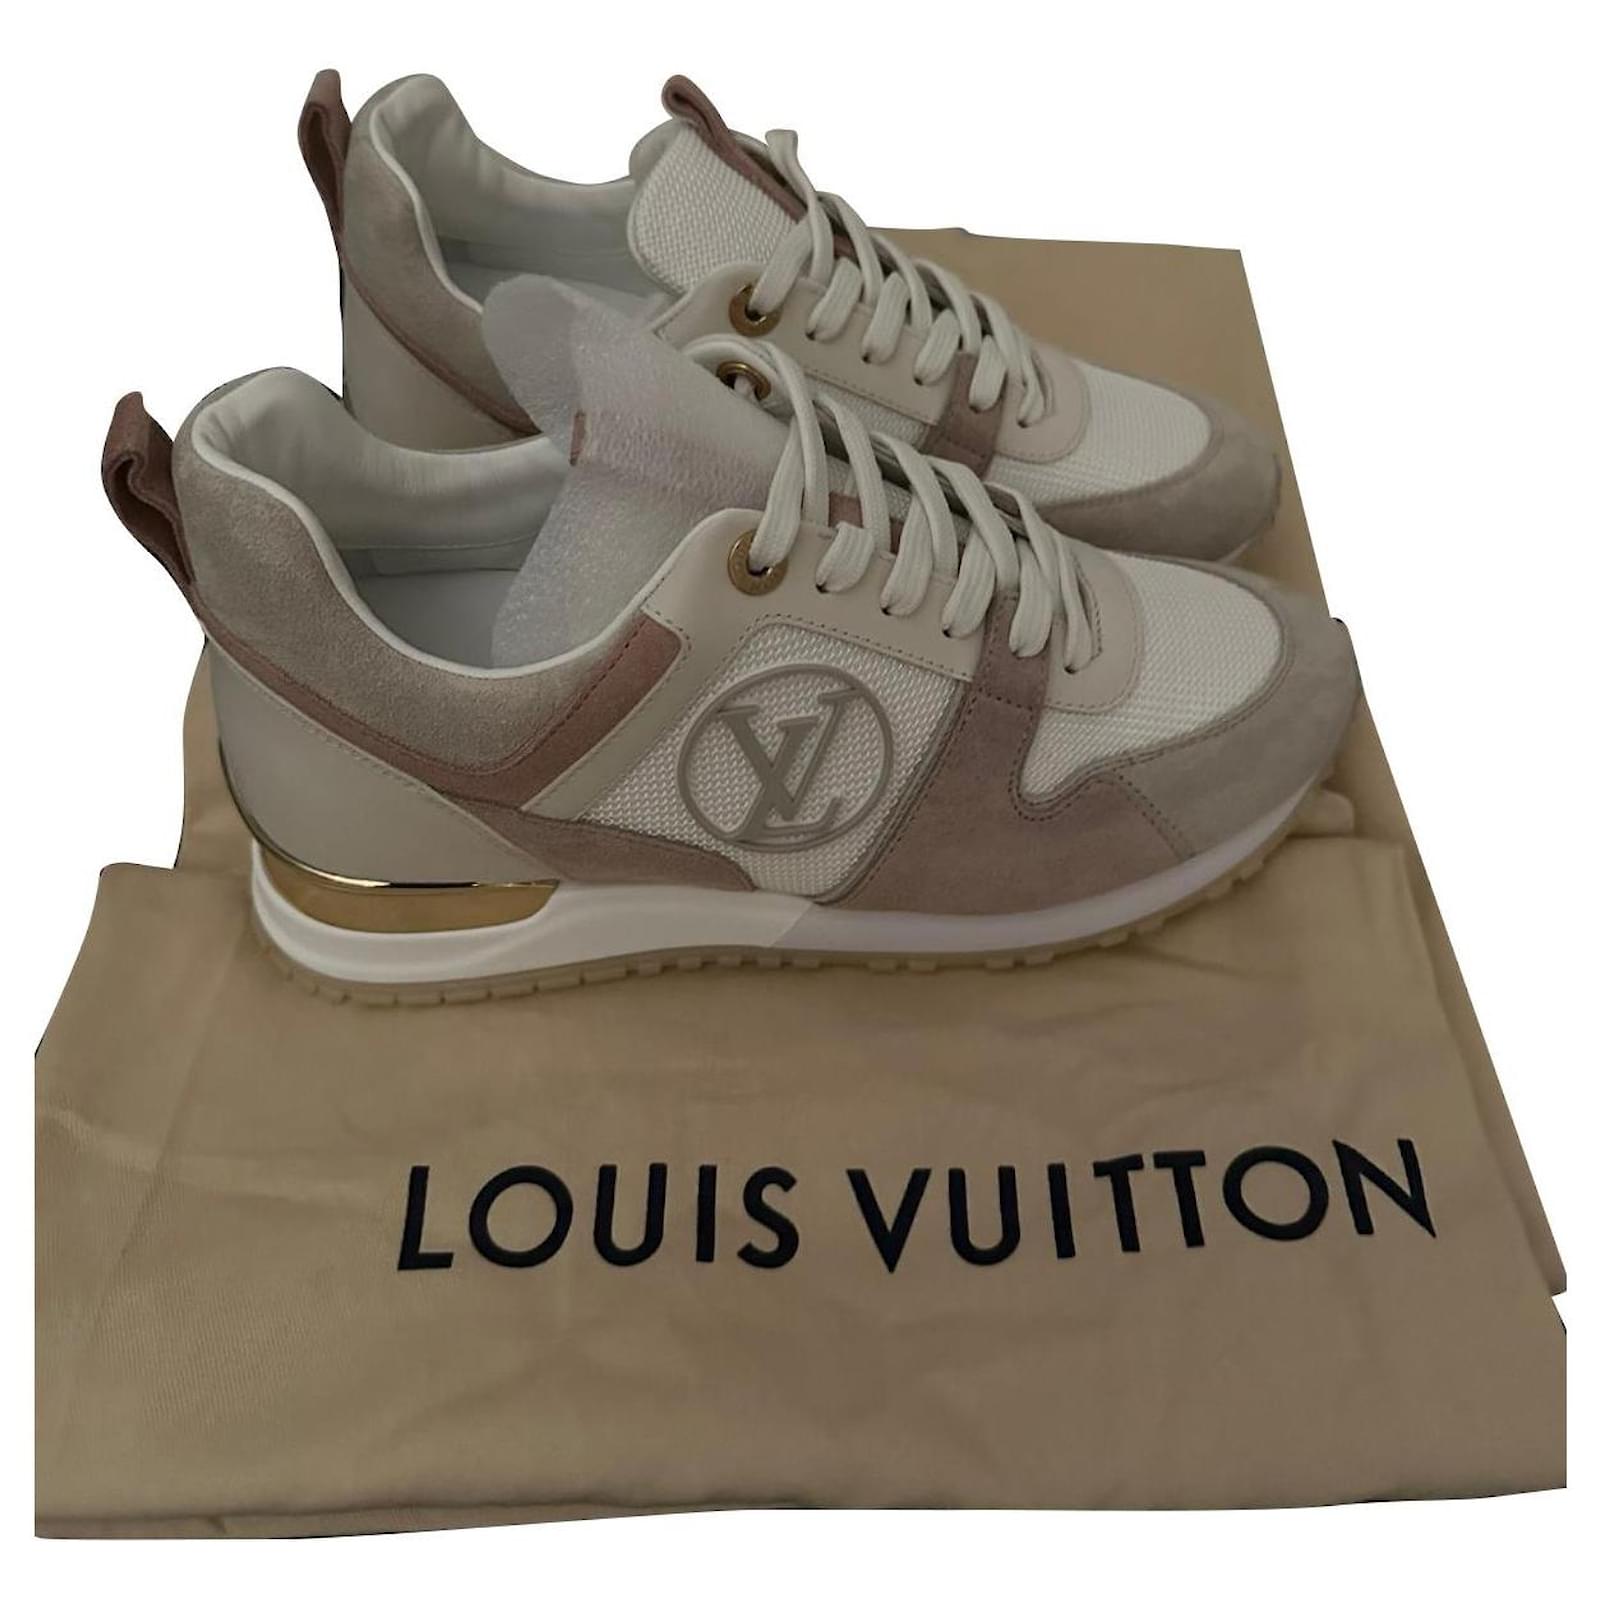 Køre ud Blossom Forbedring Louis Vuitton Run away White Leather ref.863878 - Joli Closet